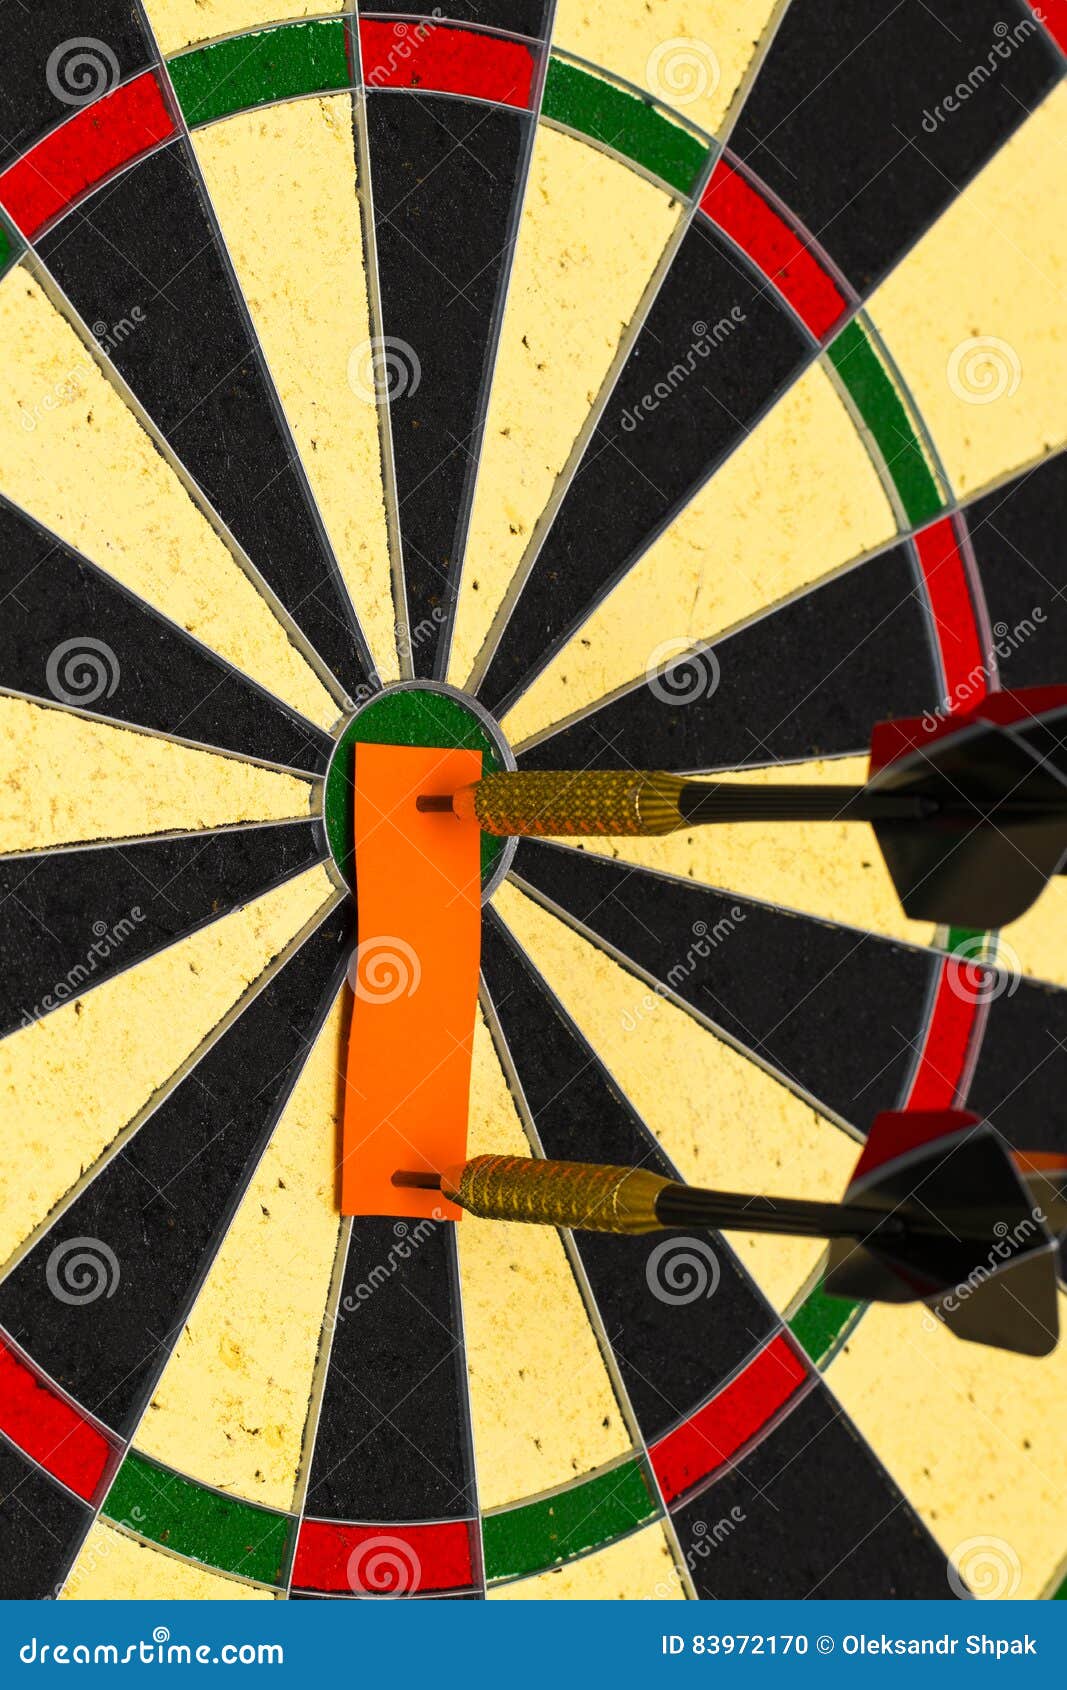 darts with dart which was pinned a sheet of paper for labels